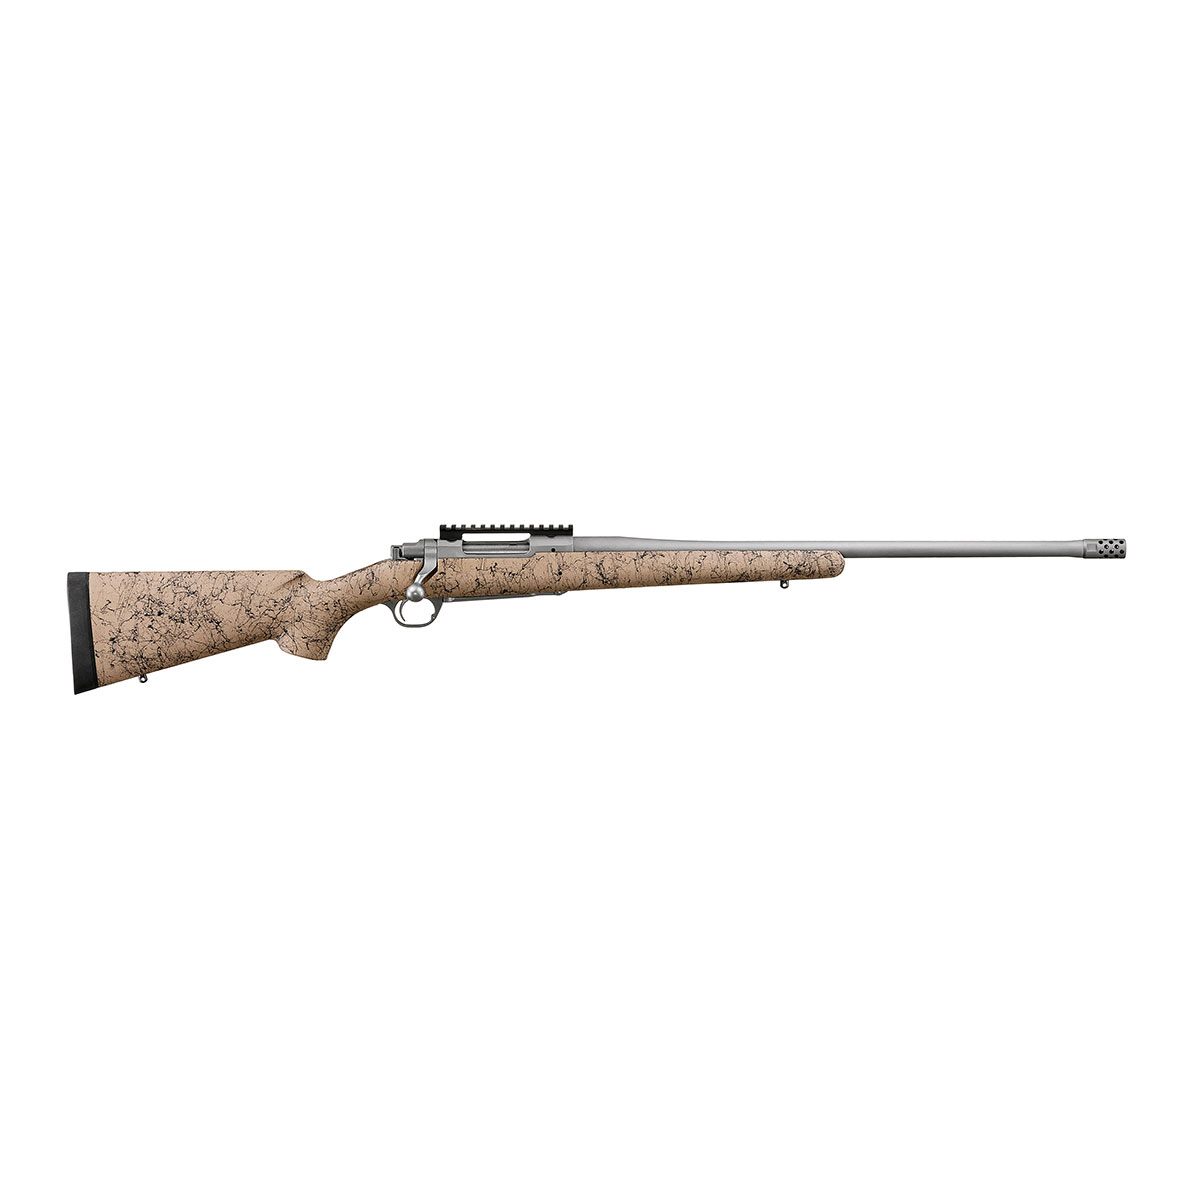 RUGER - HAWKEYE FTW HUNTER 308 WINCHESTER BOLT ACTION RIFLE